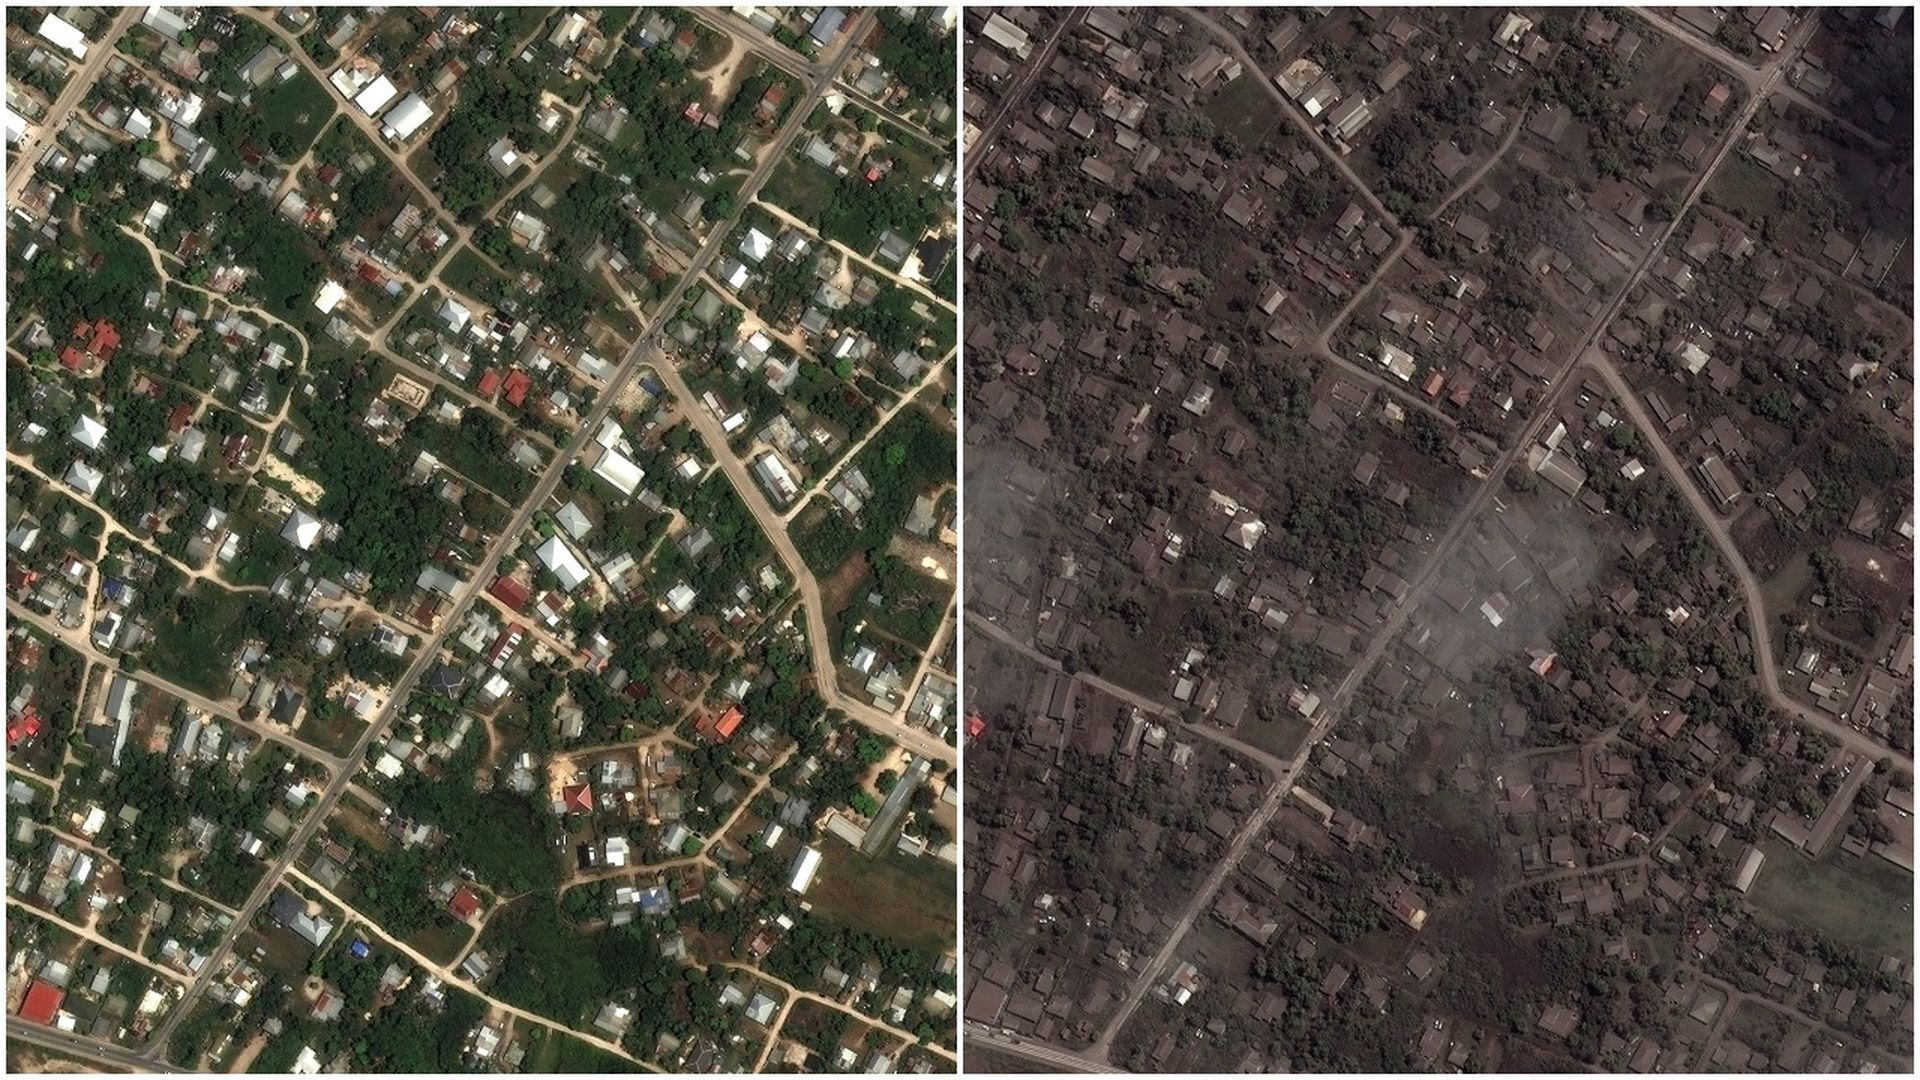 Satellite images of homes and other buildings before and after Tonga's volcanic eruption.